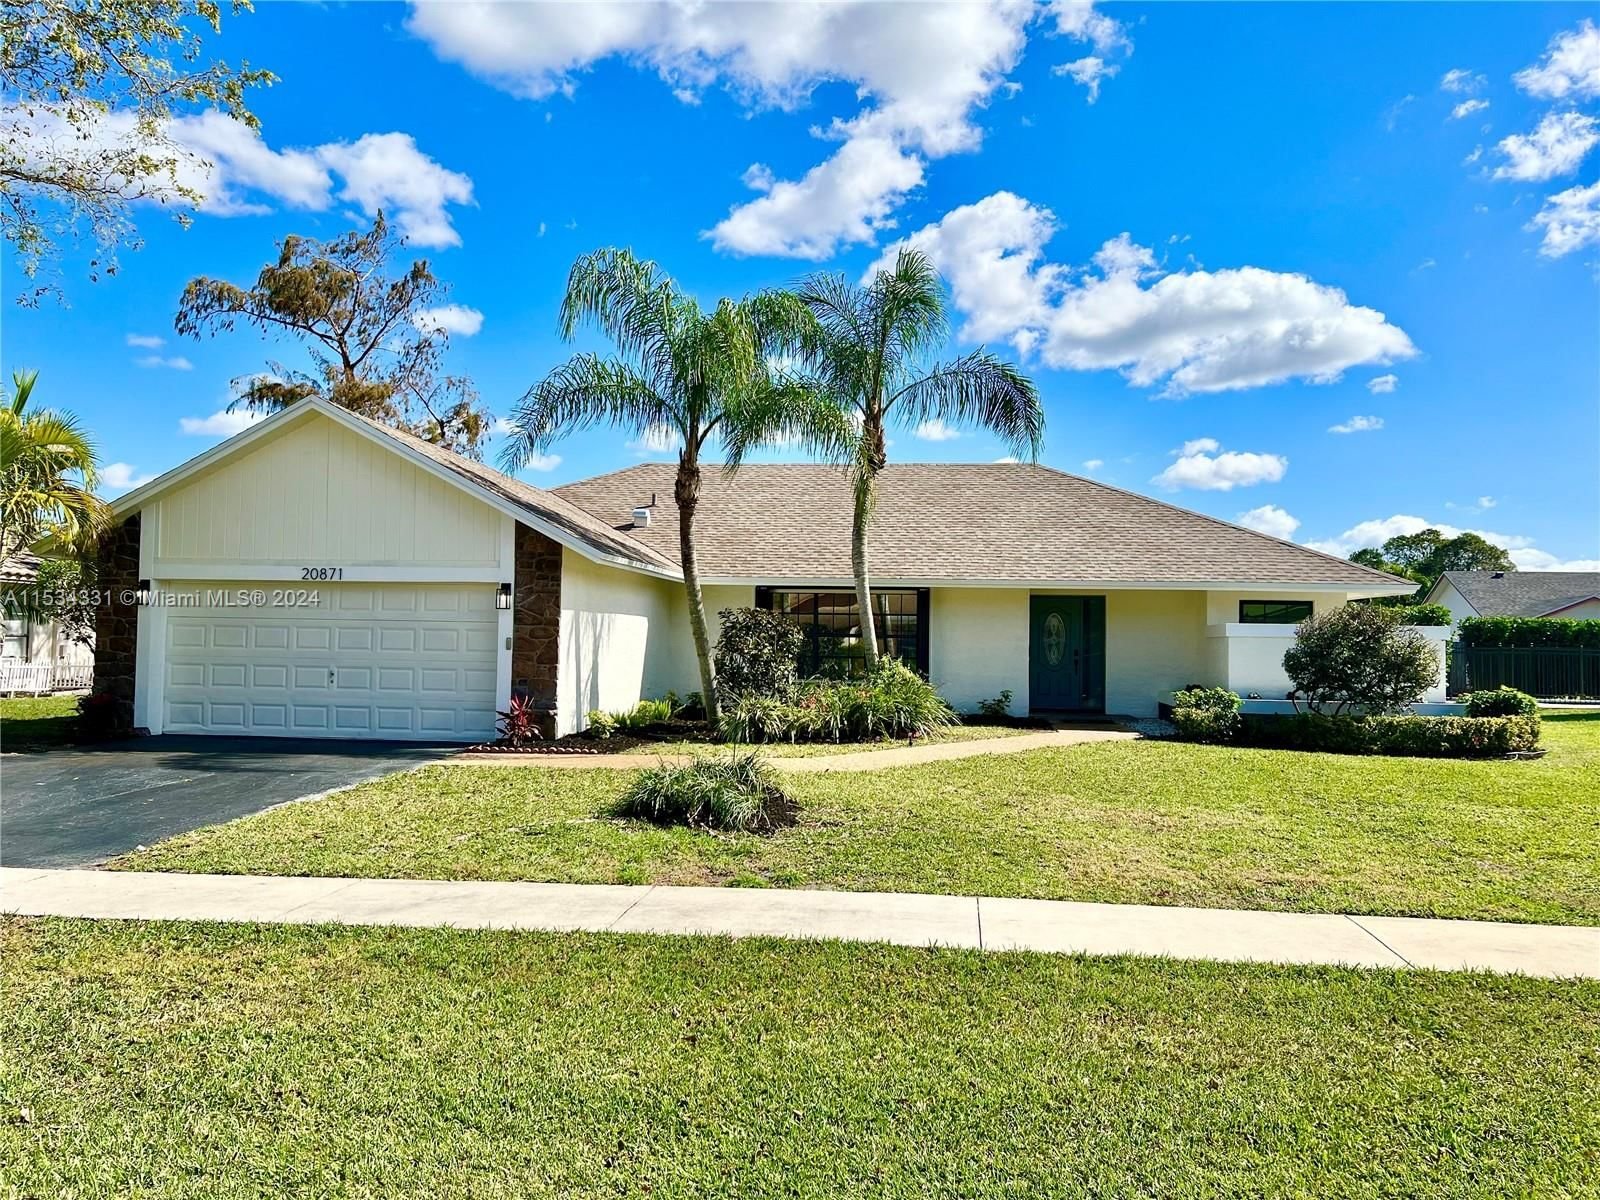 Real estate property located at 20871 Sugarloaf Ln, Palm Beach County, INDIAN HEAD SEC 2, Boca Raton, FL